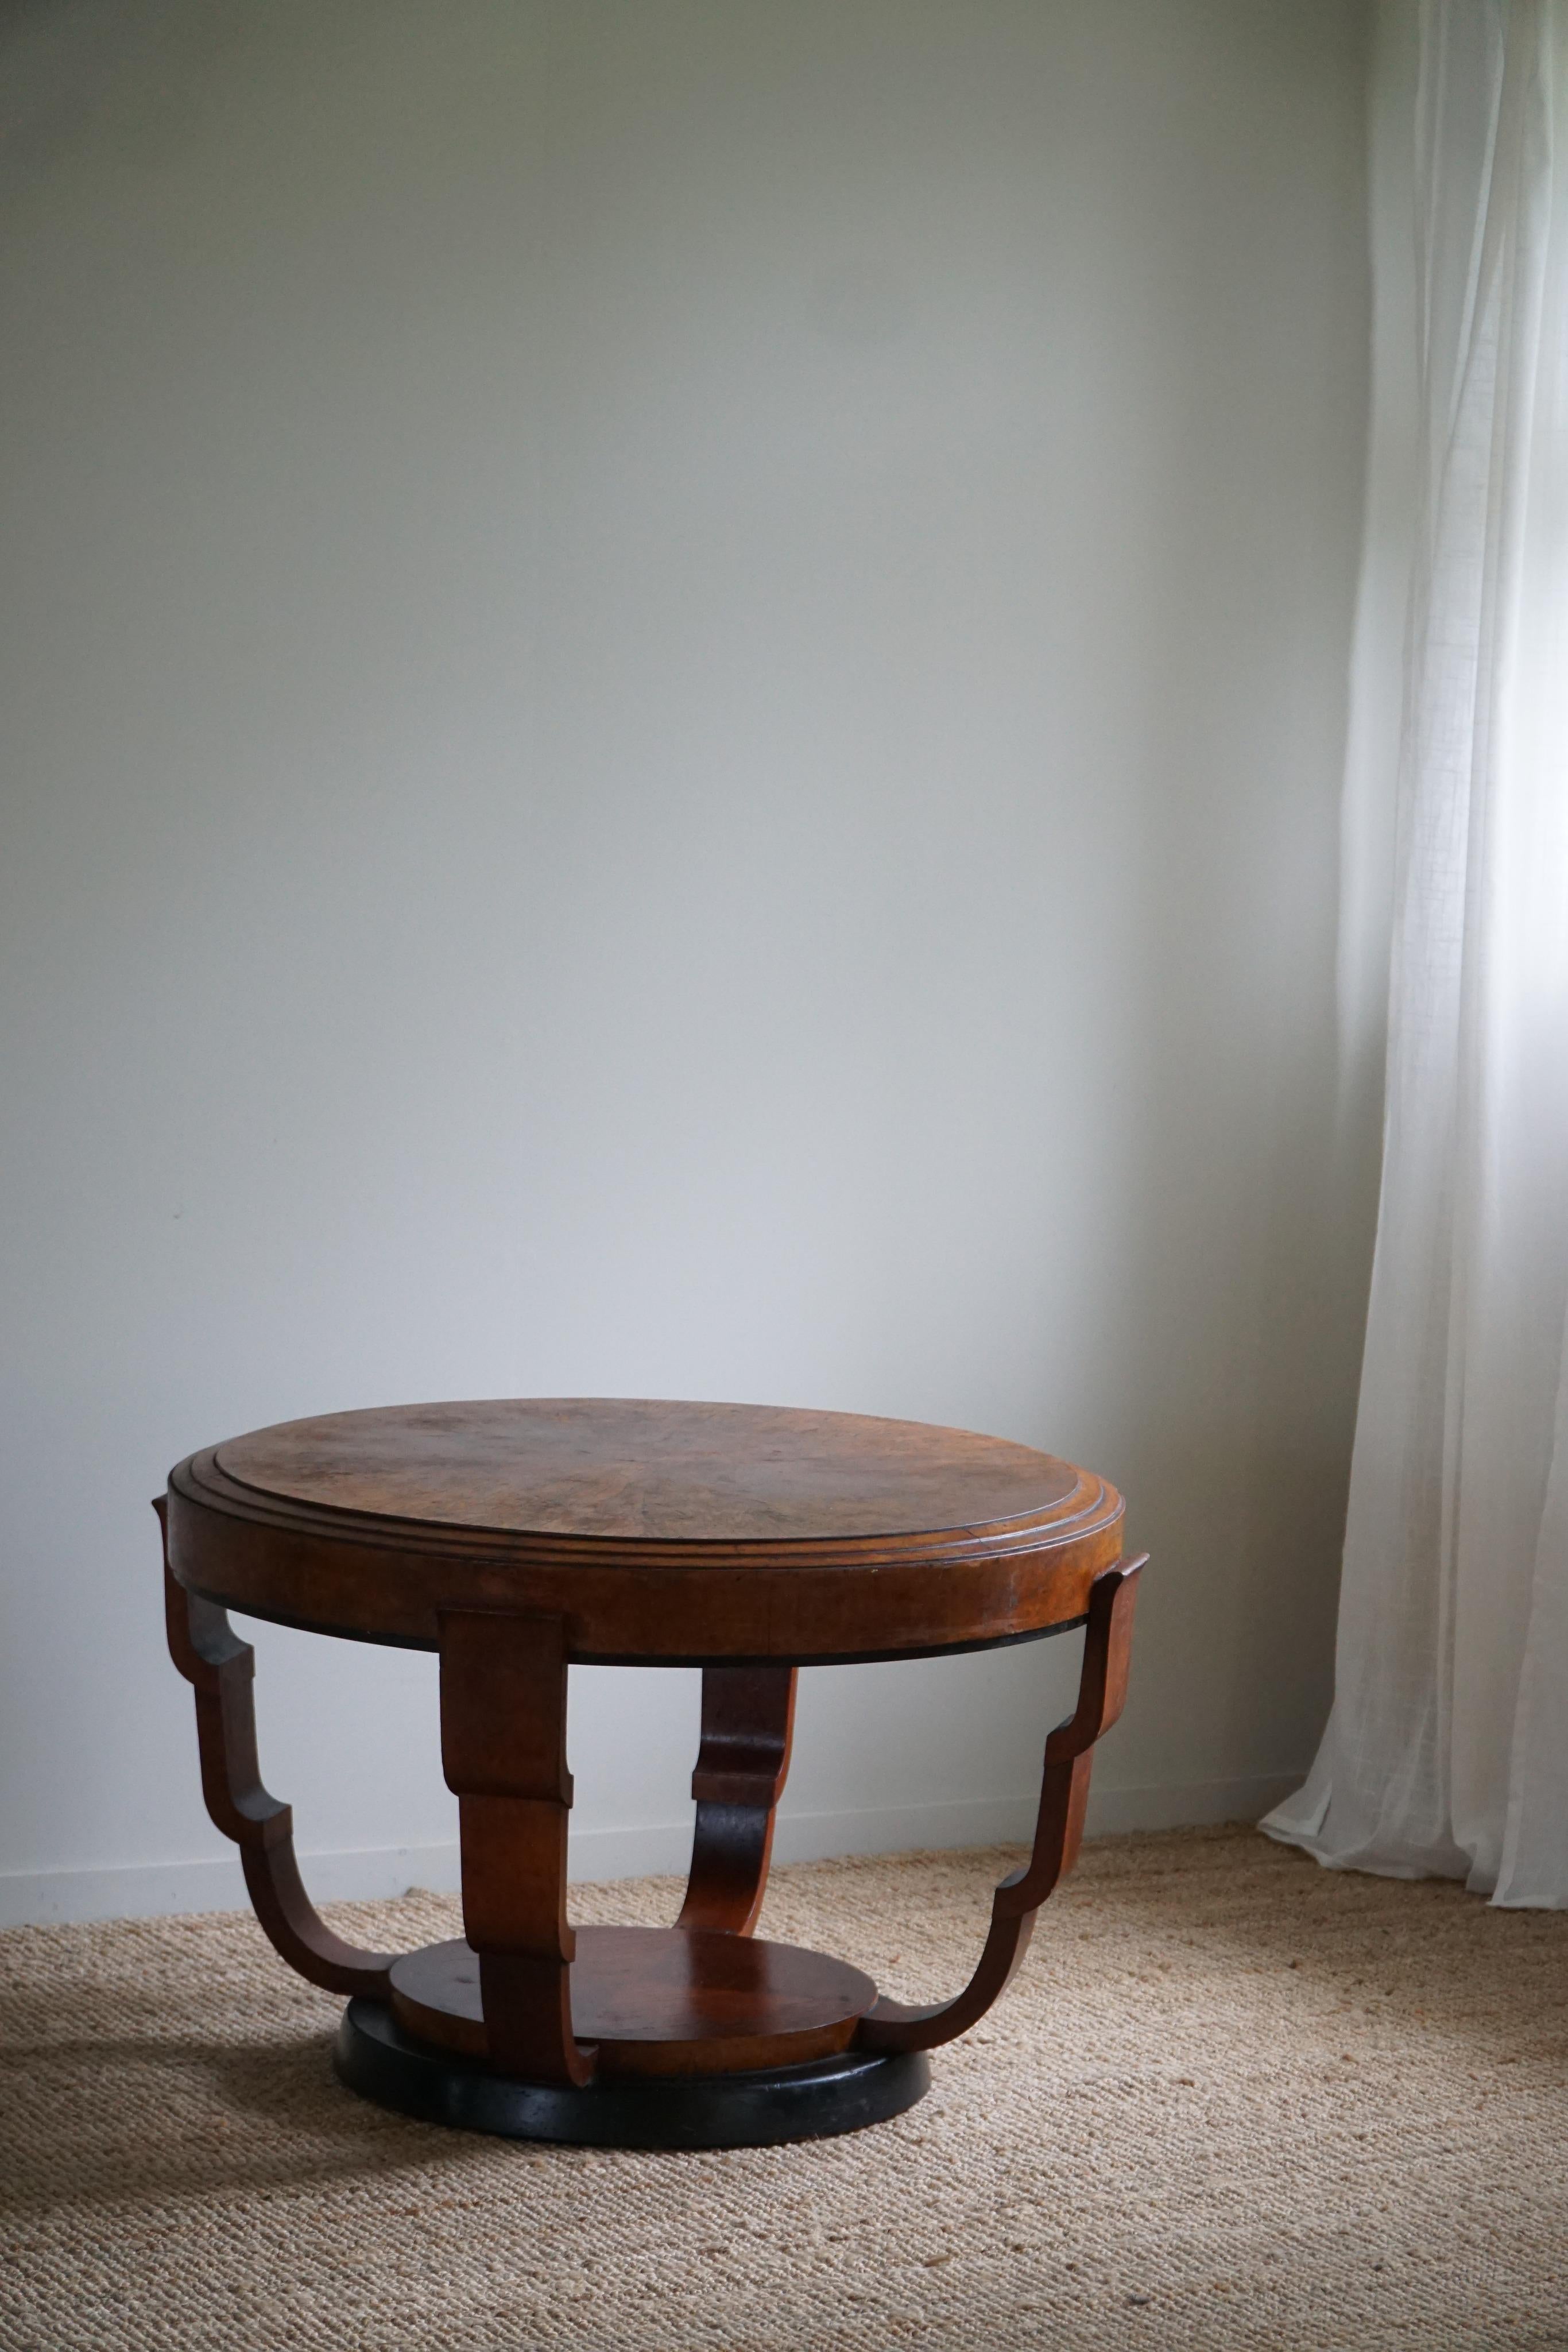 Art Deco, Large Round Sofa Table in Walnut, By a Danish Cabinetmaker, 1930s For Sale 3